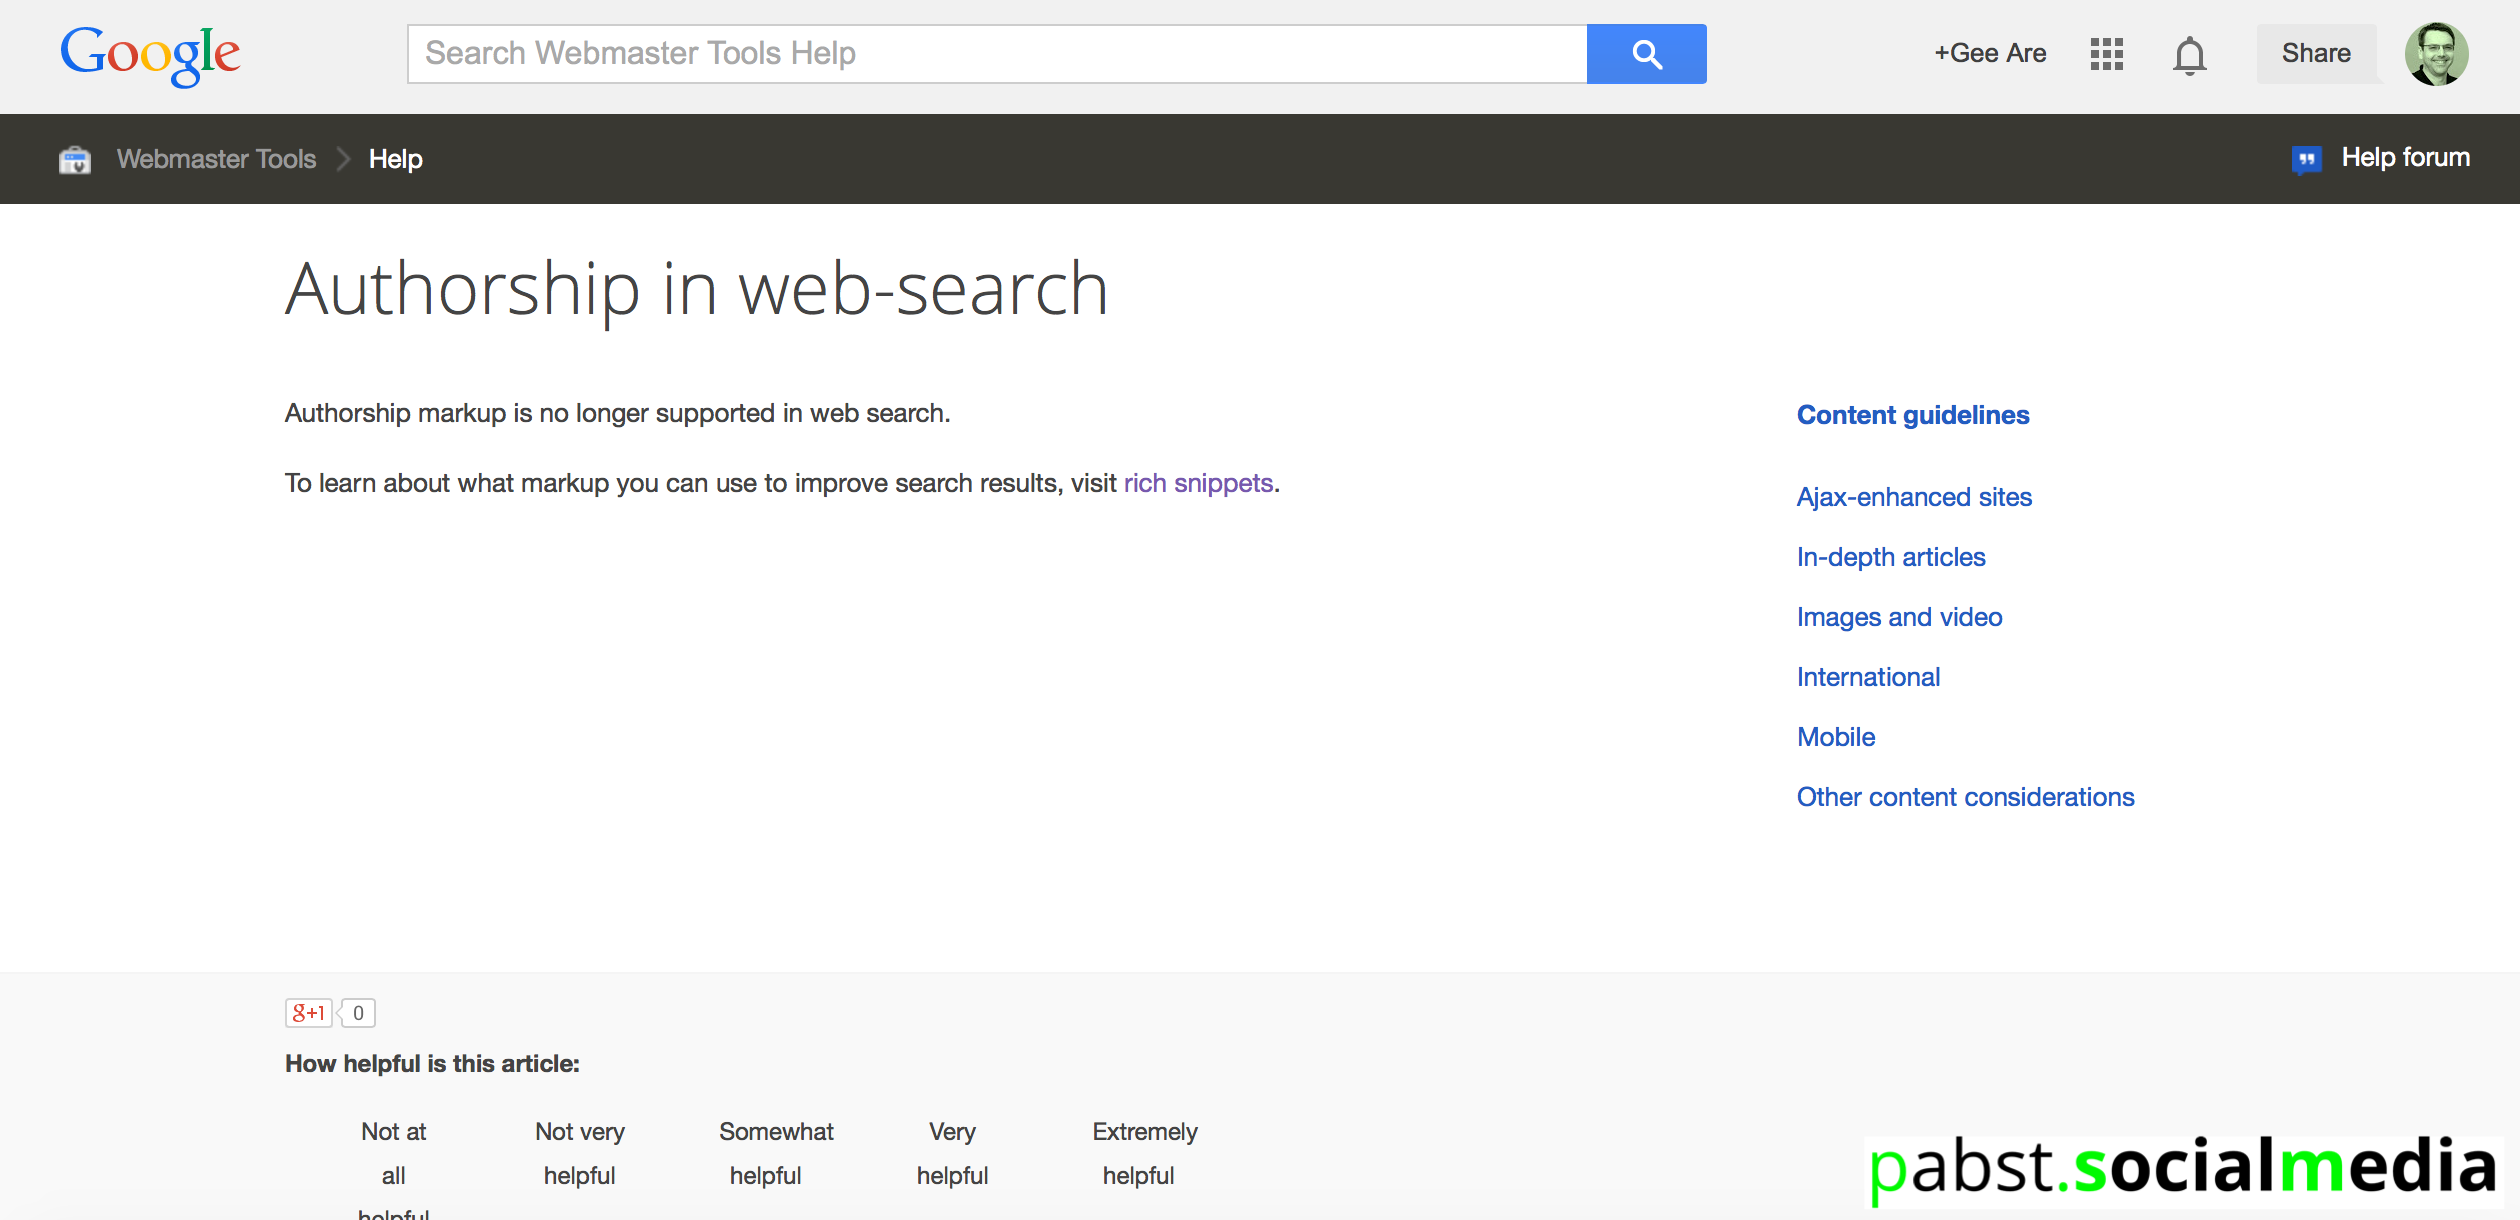 Google Authorship in web-search discontinued